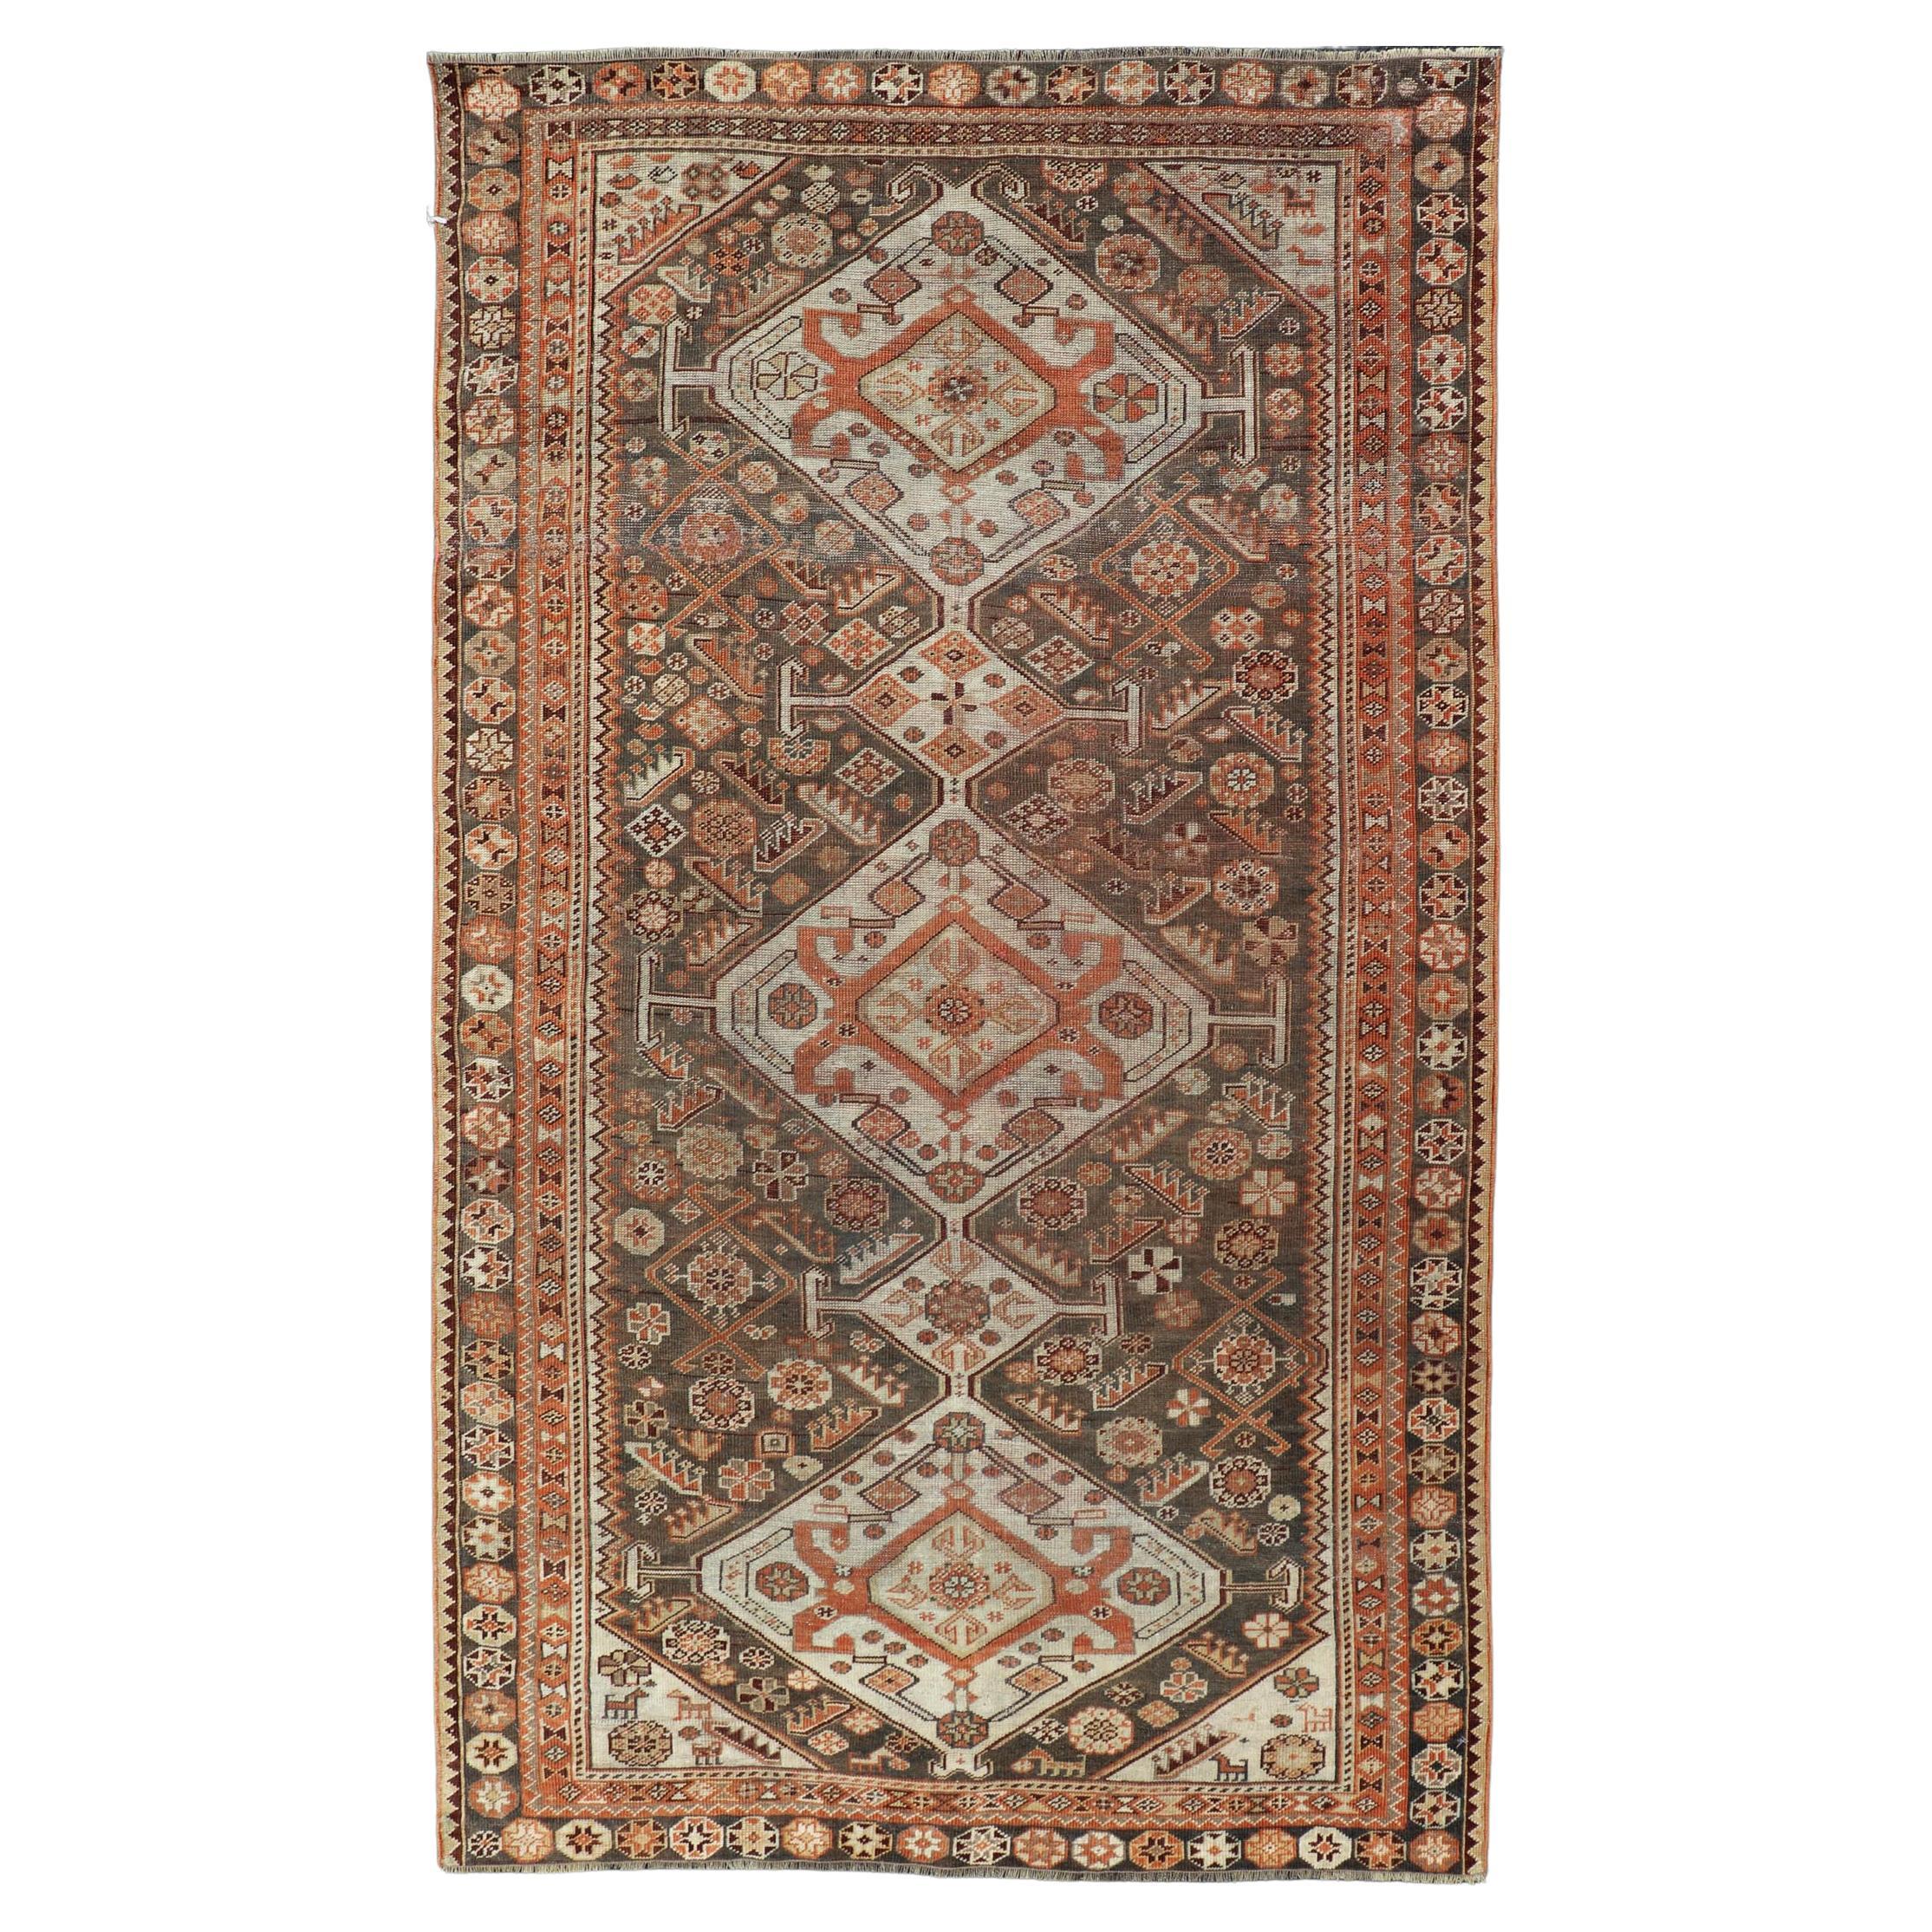 Antique Hand-Knotted Persian Shiraz in Wool with All-Over Medallion Design